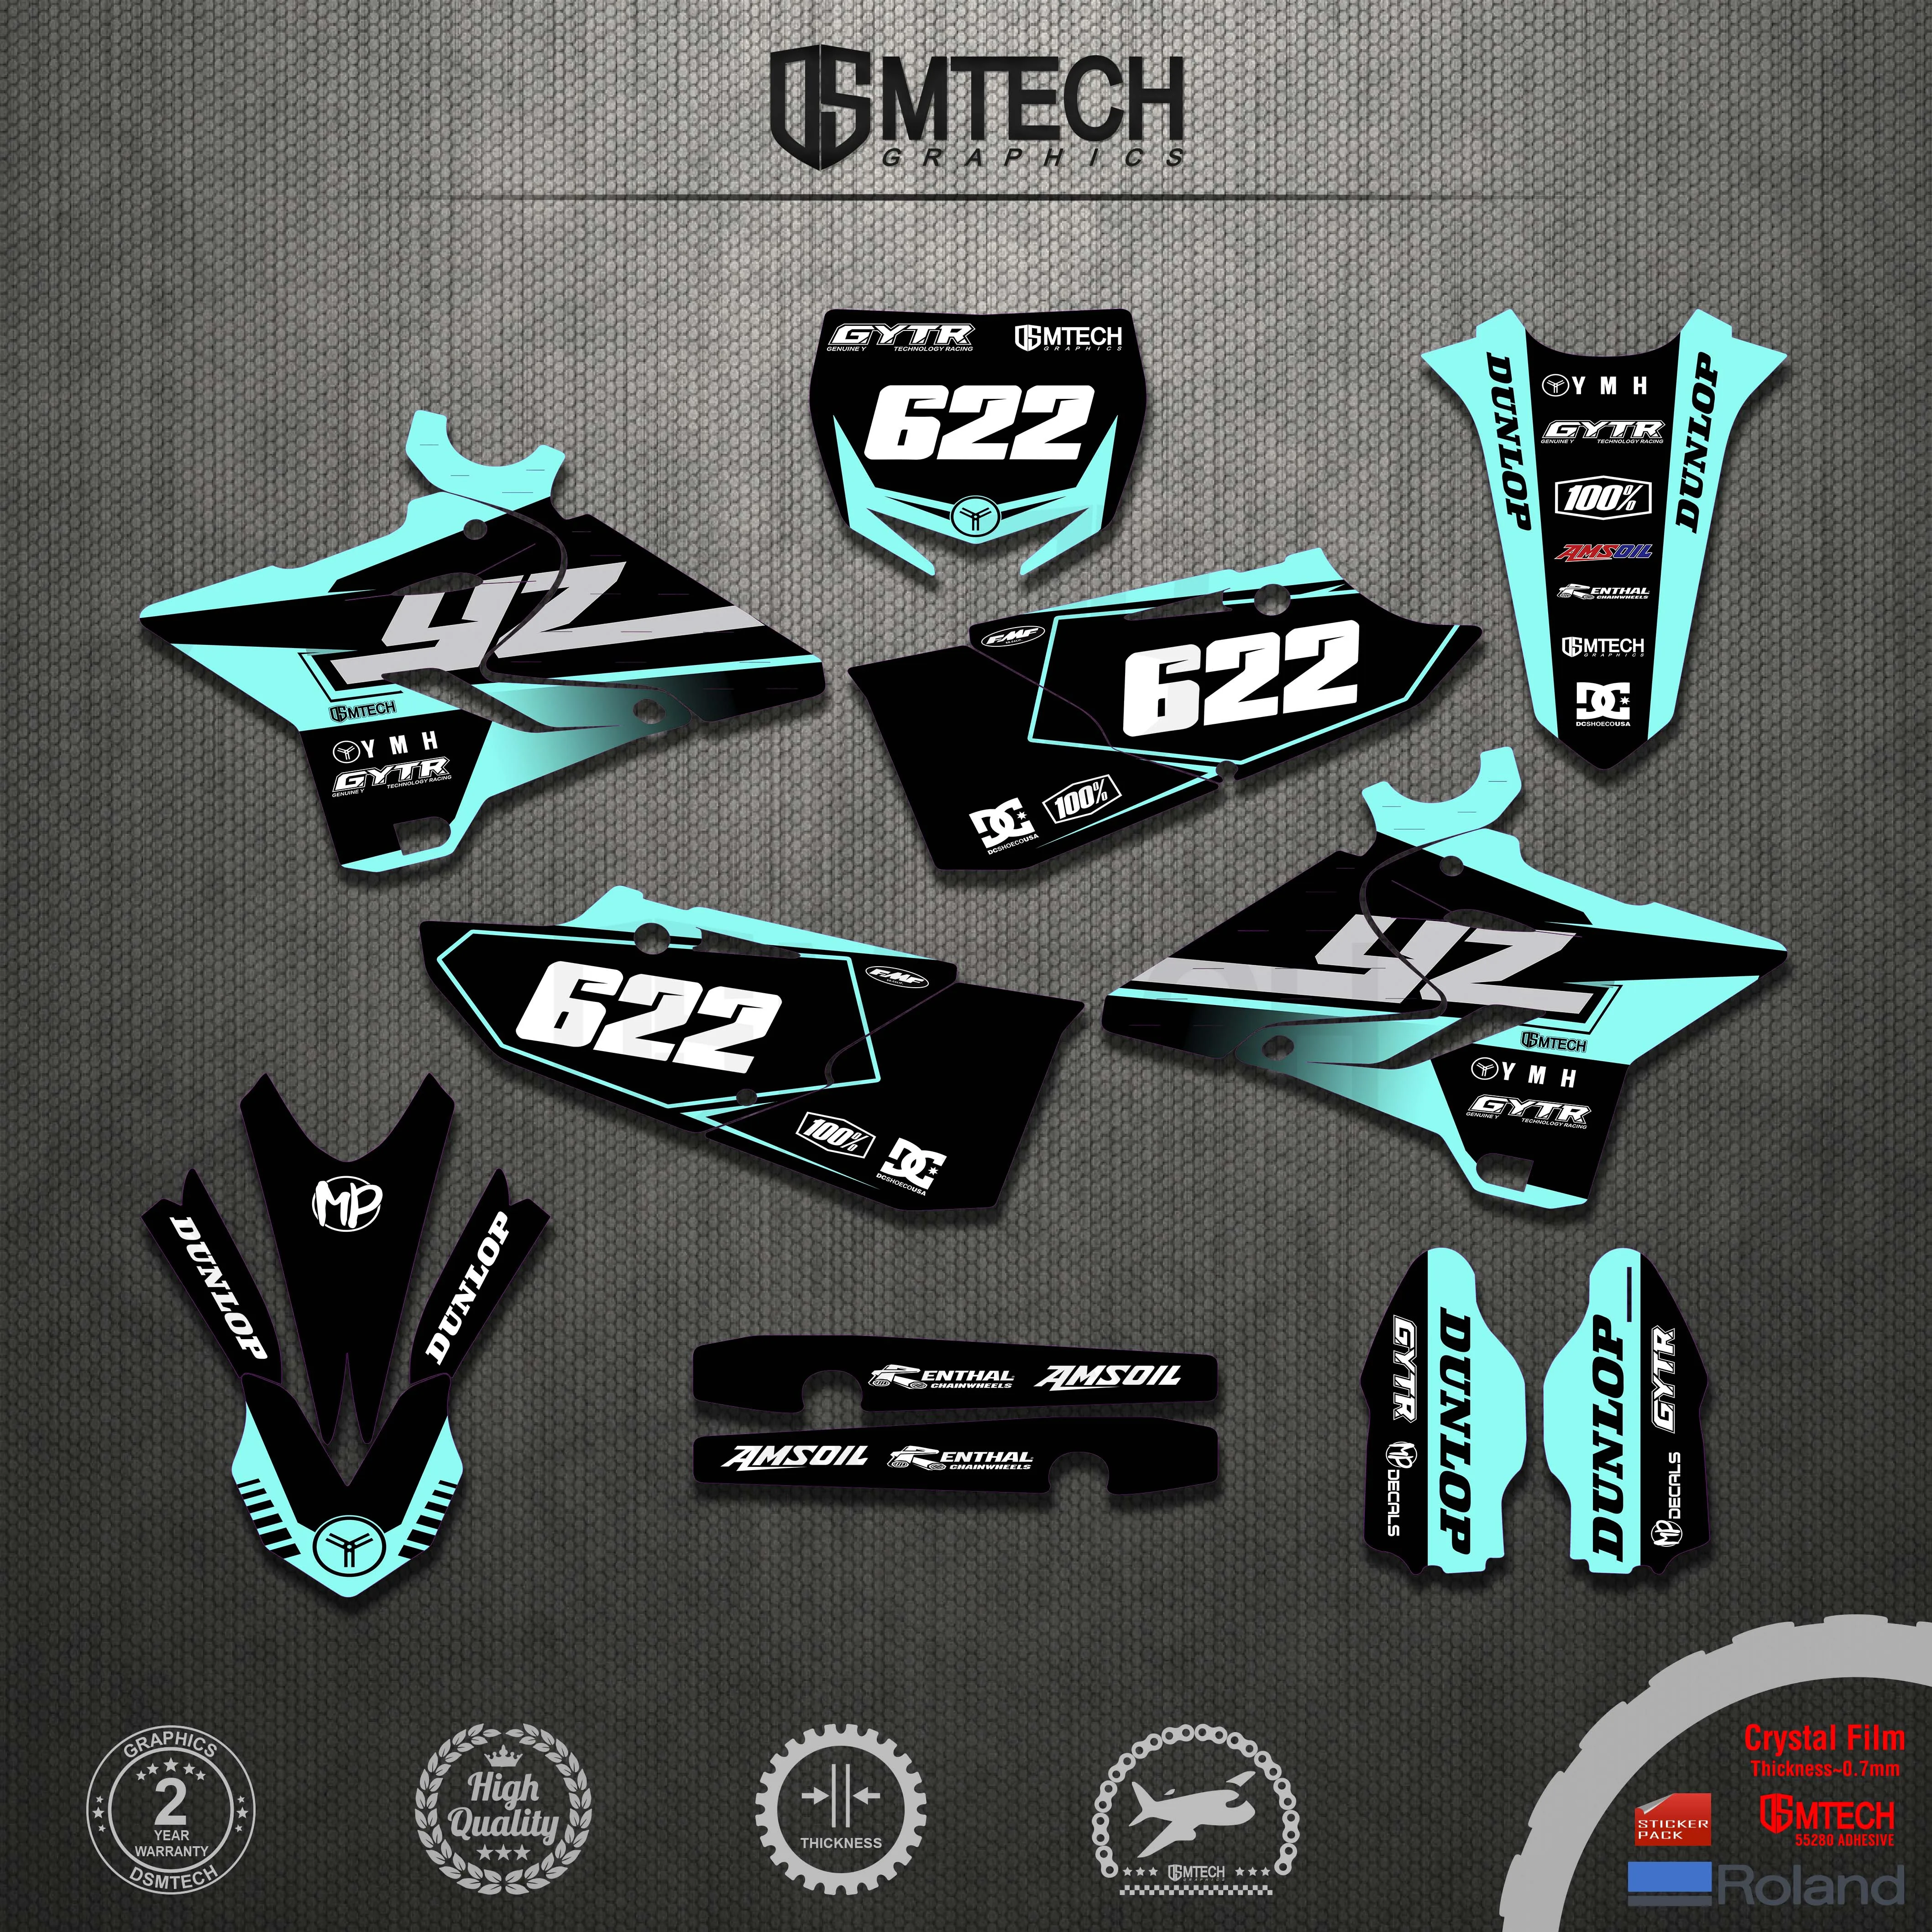 DSMTECH FOR YAMAHA YZ125 YZ250 125 YZ 2015 2016 2017 2018 2019 2020 2021 250YZ GRAPHICS Personalised Stickers Motorcycle Decals